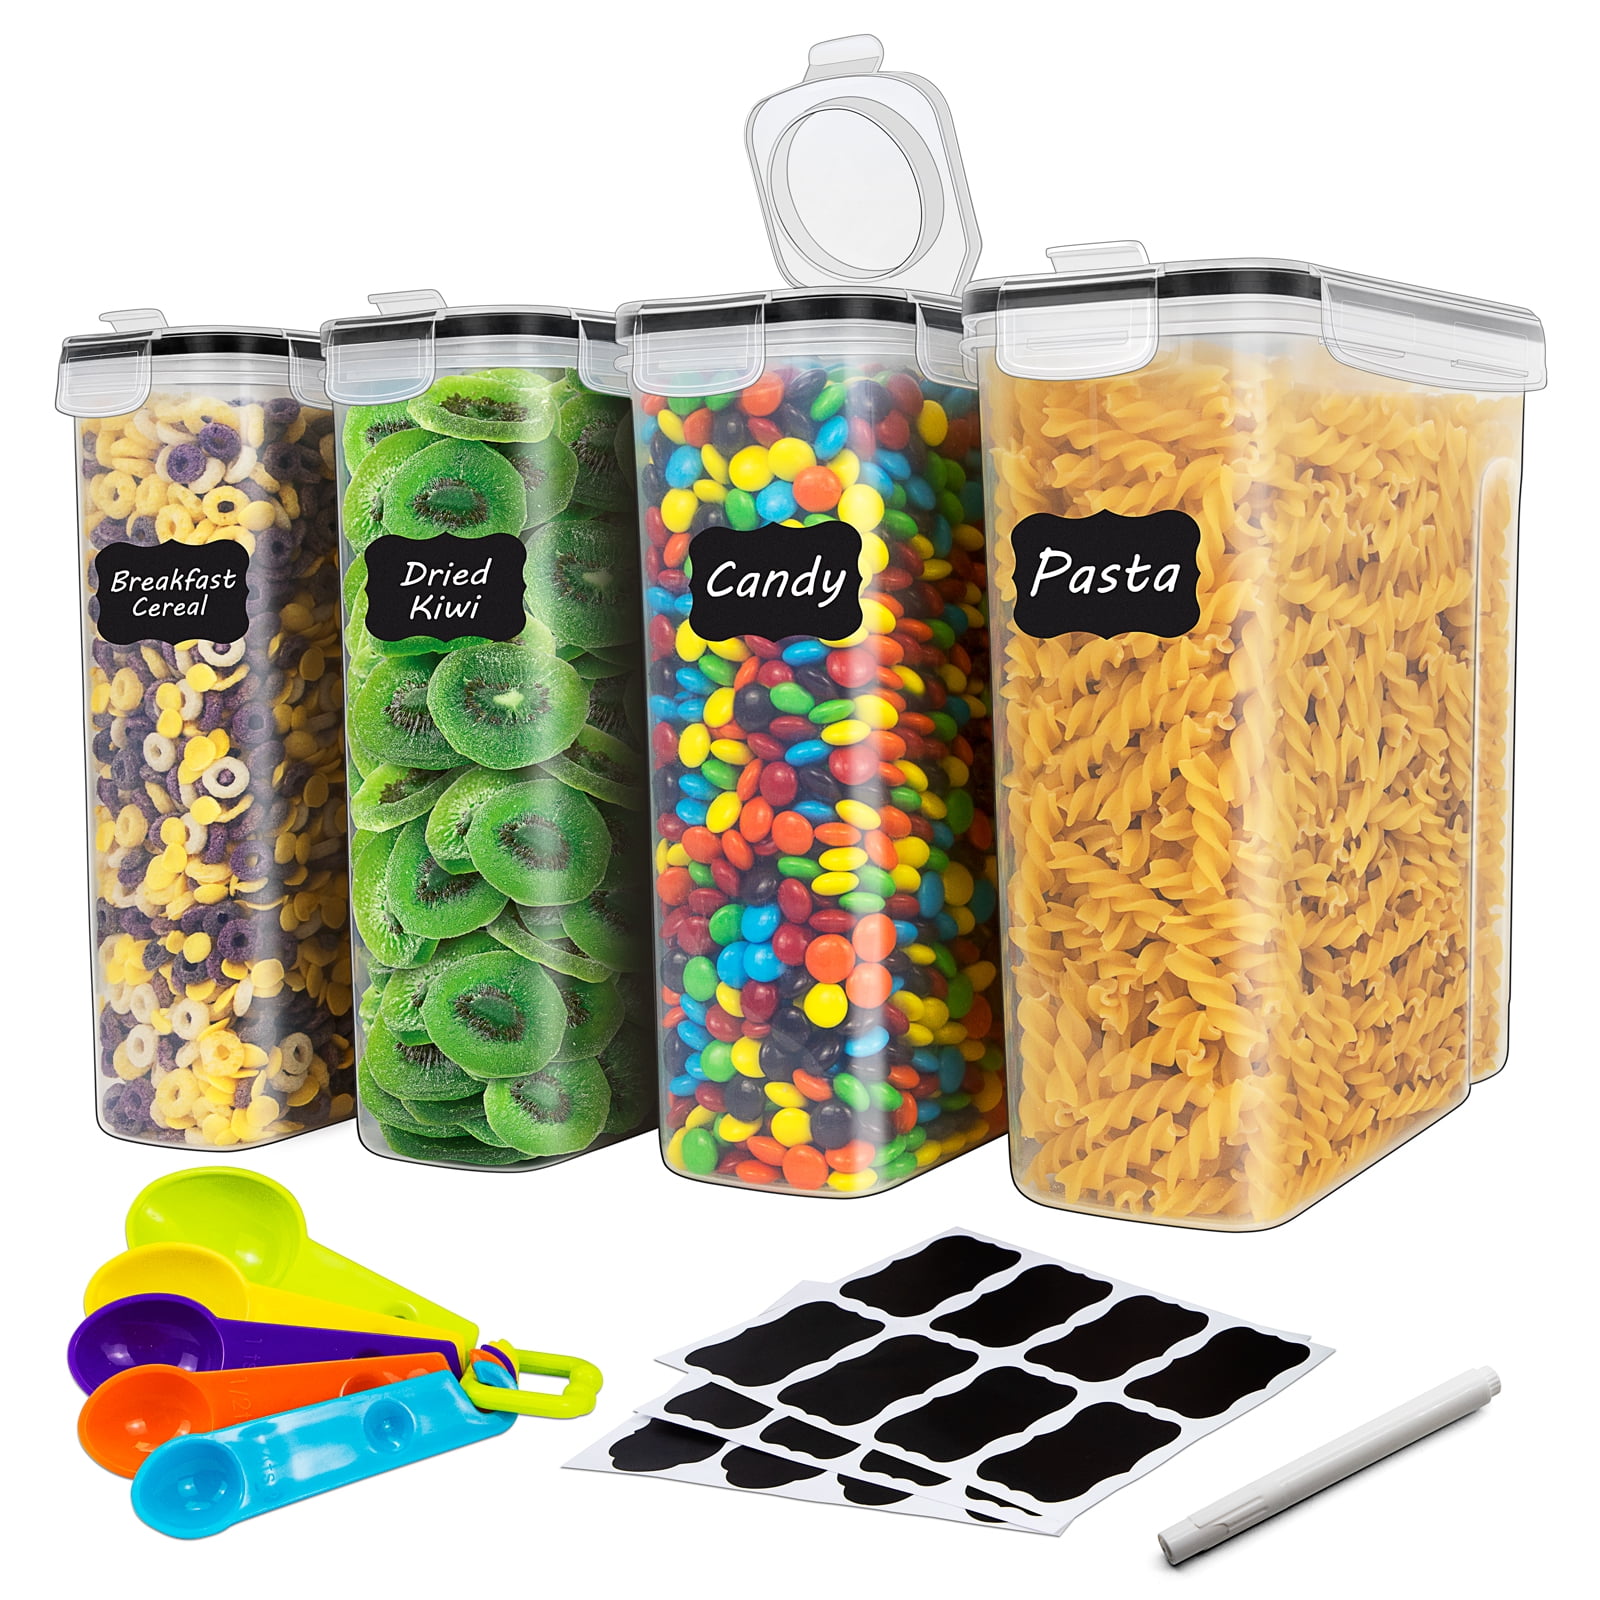 Rubbermaid® Cereal Keeper Storage Container, 1.5 gal - Kroger